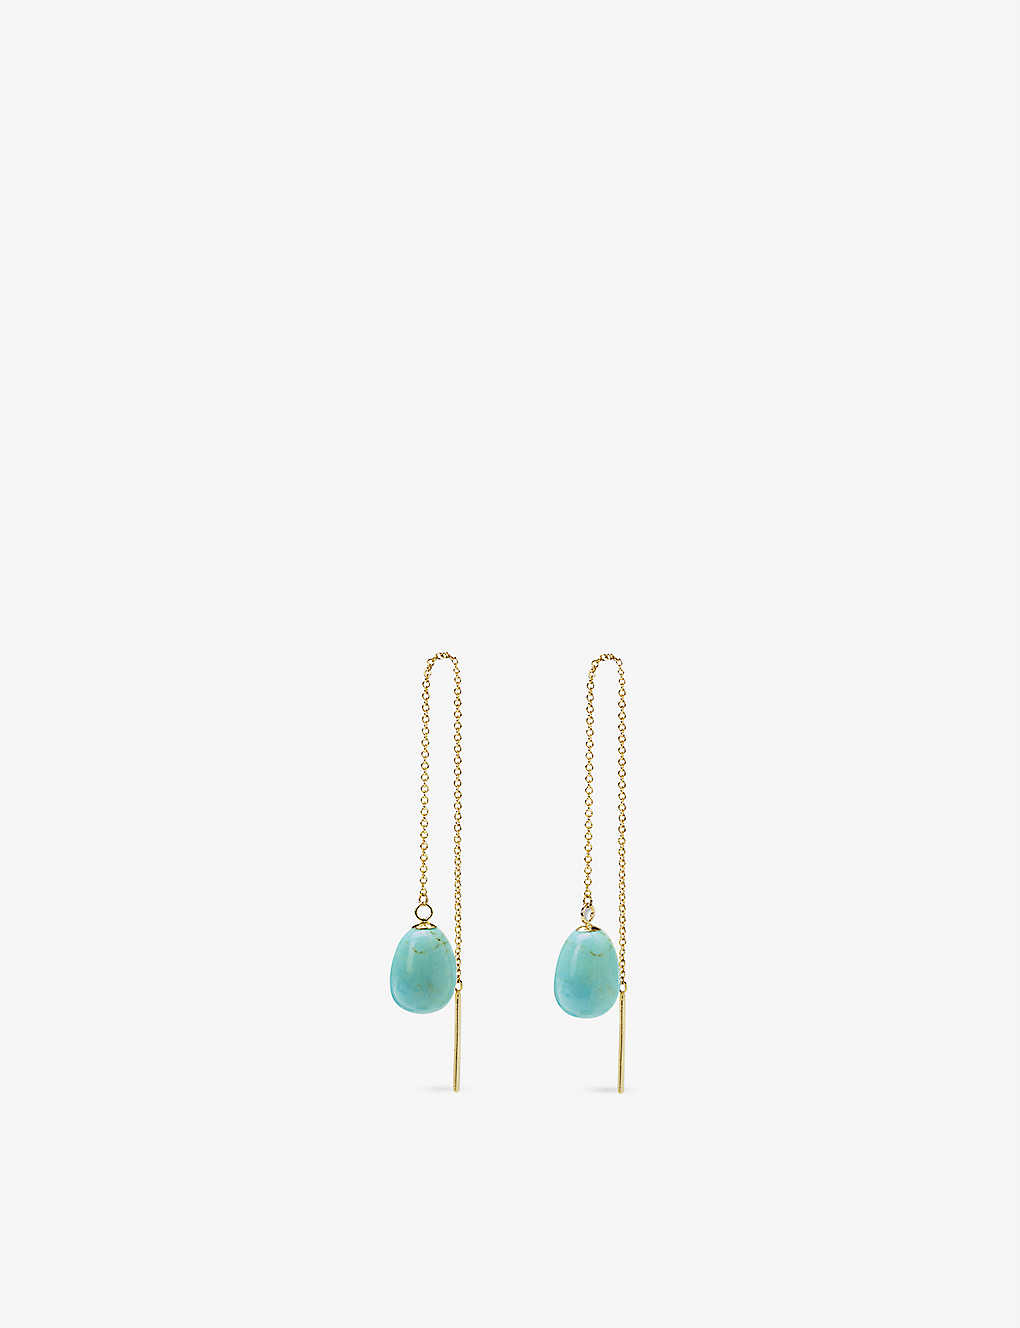 The Alkemistry Vianna 18ct Yellow Gold And Turquoise Drop Earrings